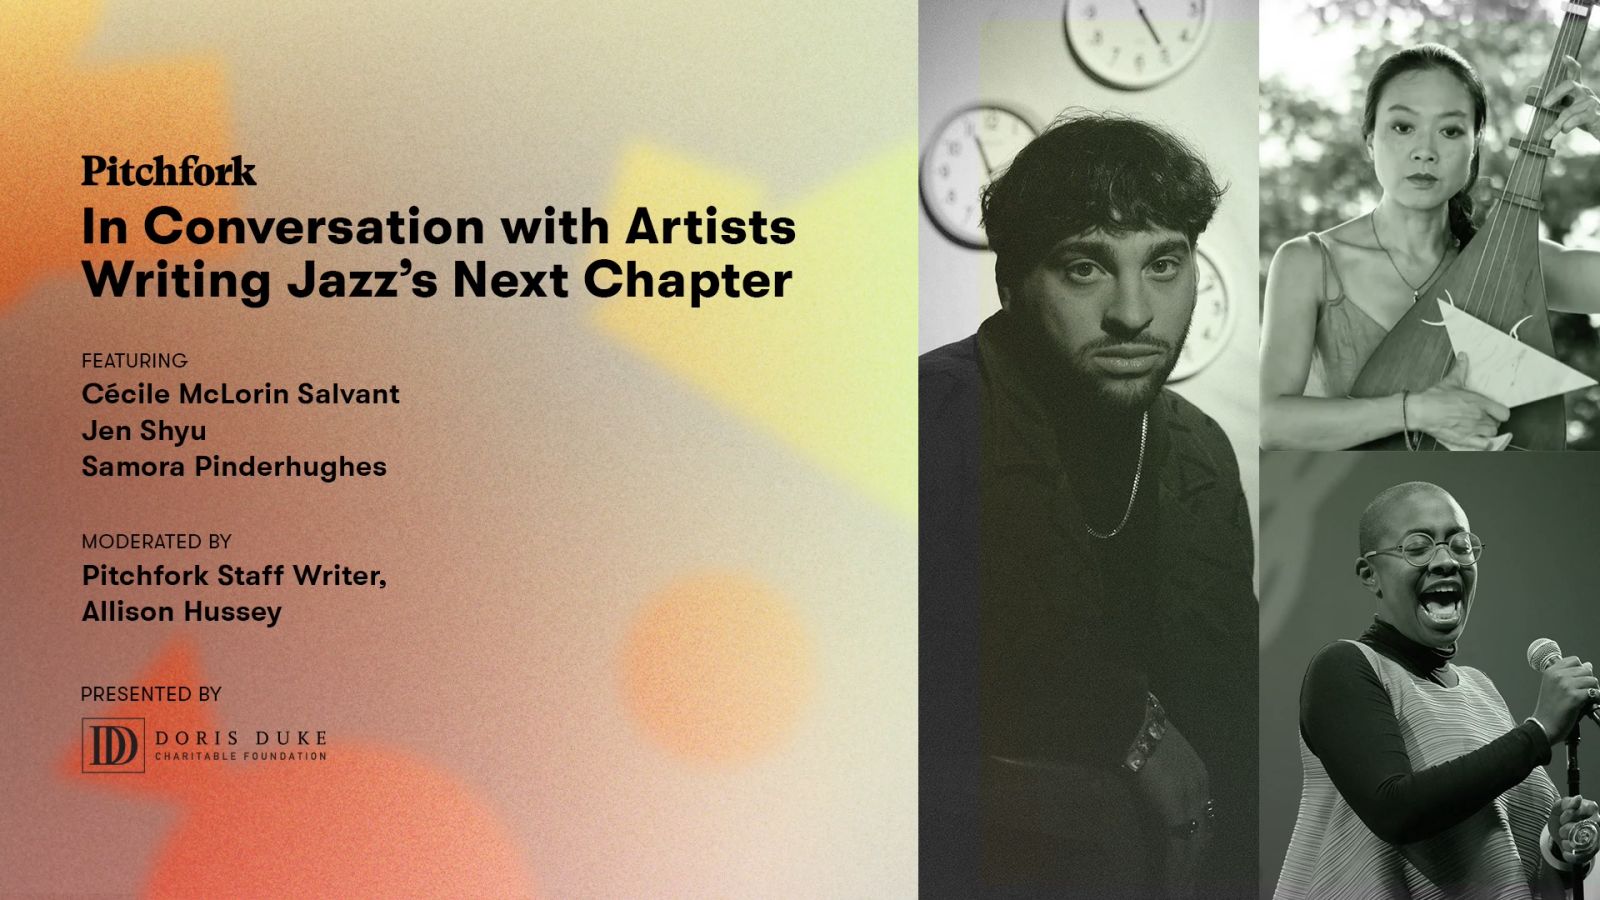 In Conversation with Artists Writing Jazz's Next Chapter